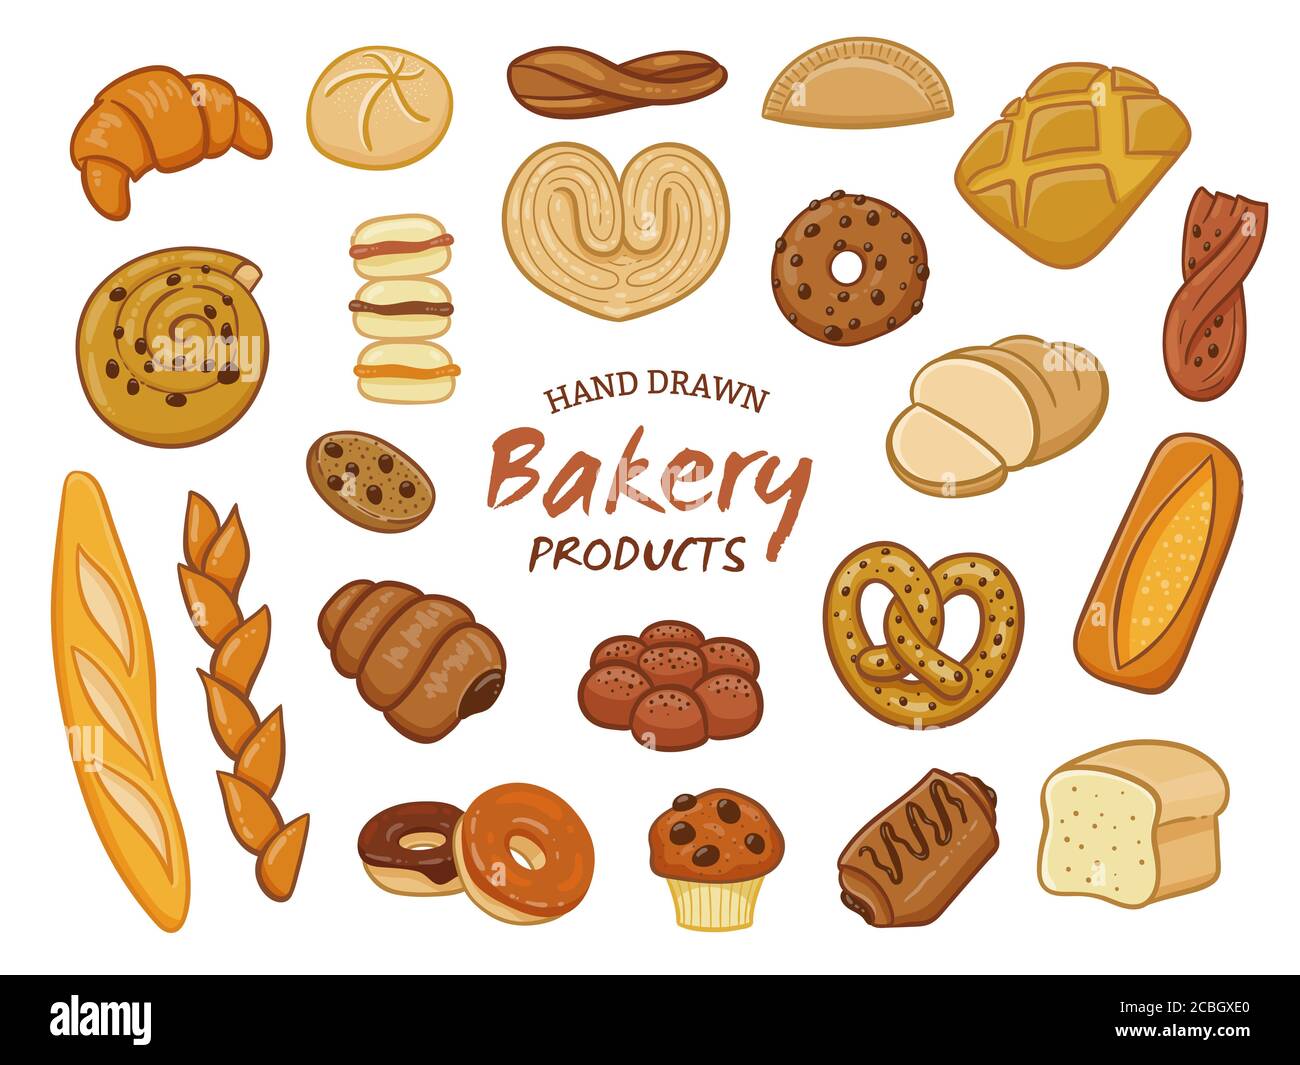 Set of various sorts of bread and bakery products. Hand drawn design elements isolated on white. Vector illustration. Stock Vector